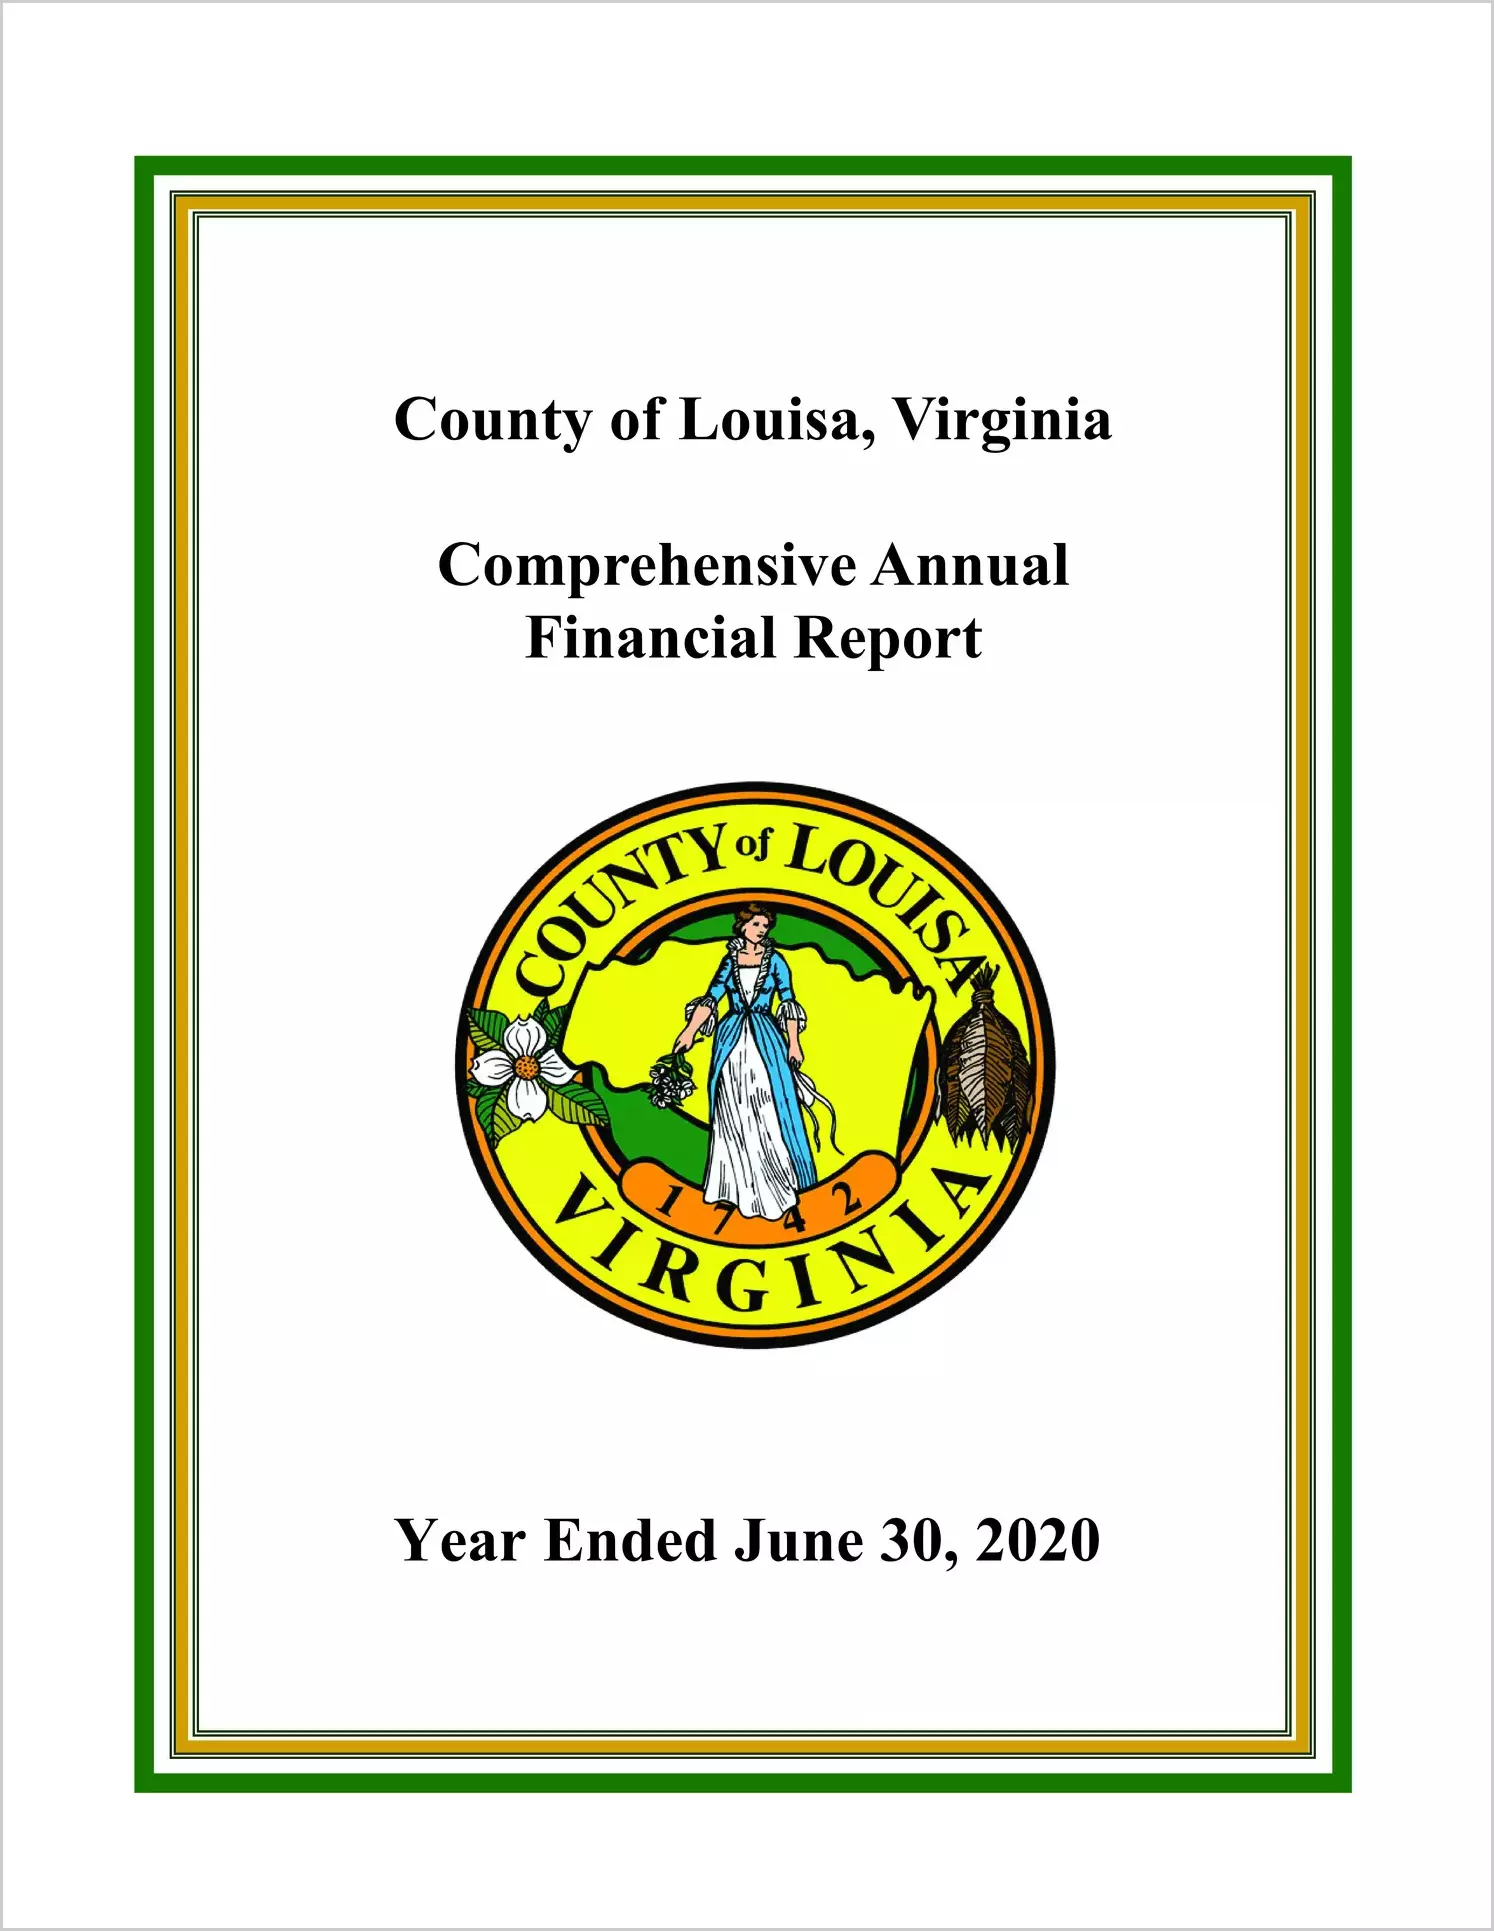 2020 Annual Financial Report for County of Louisa